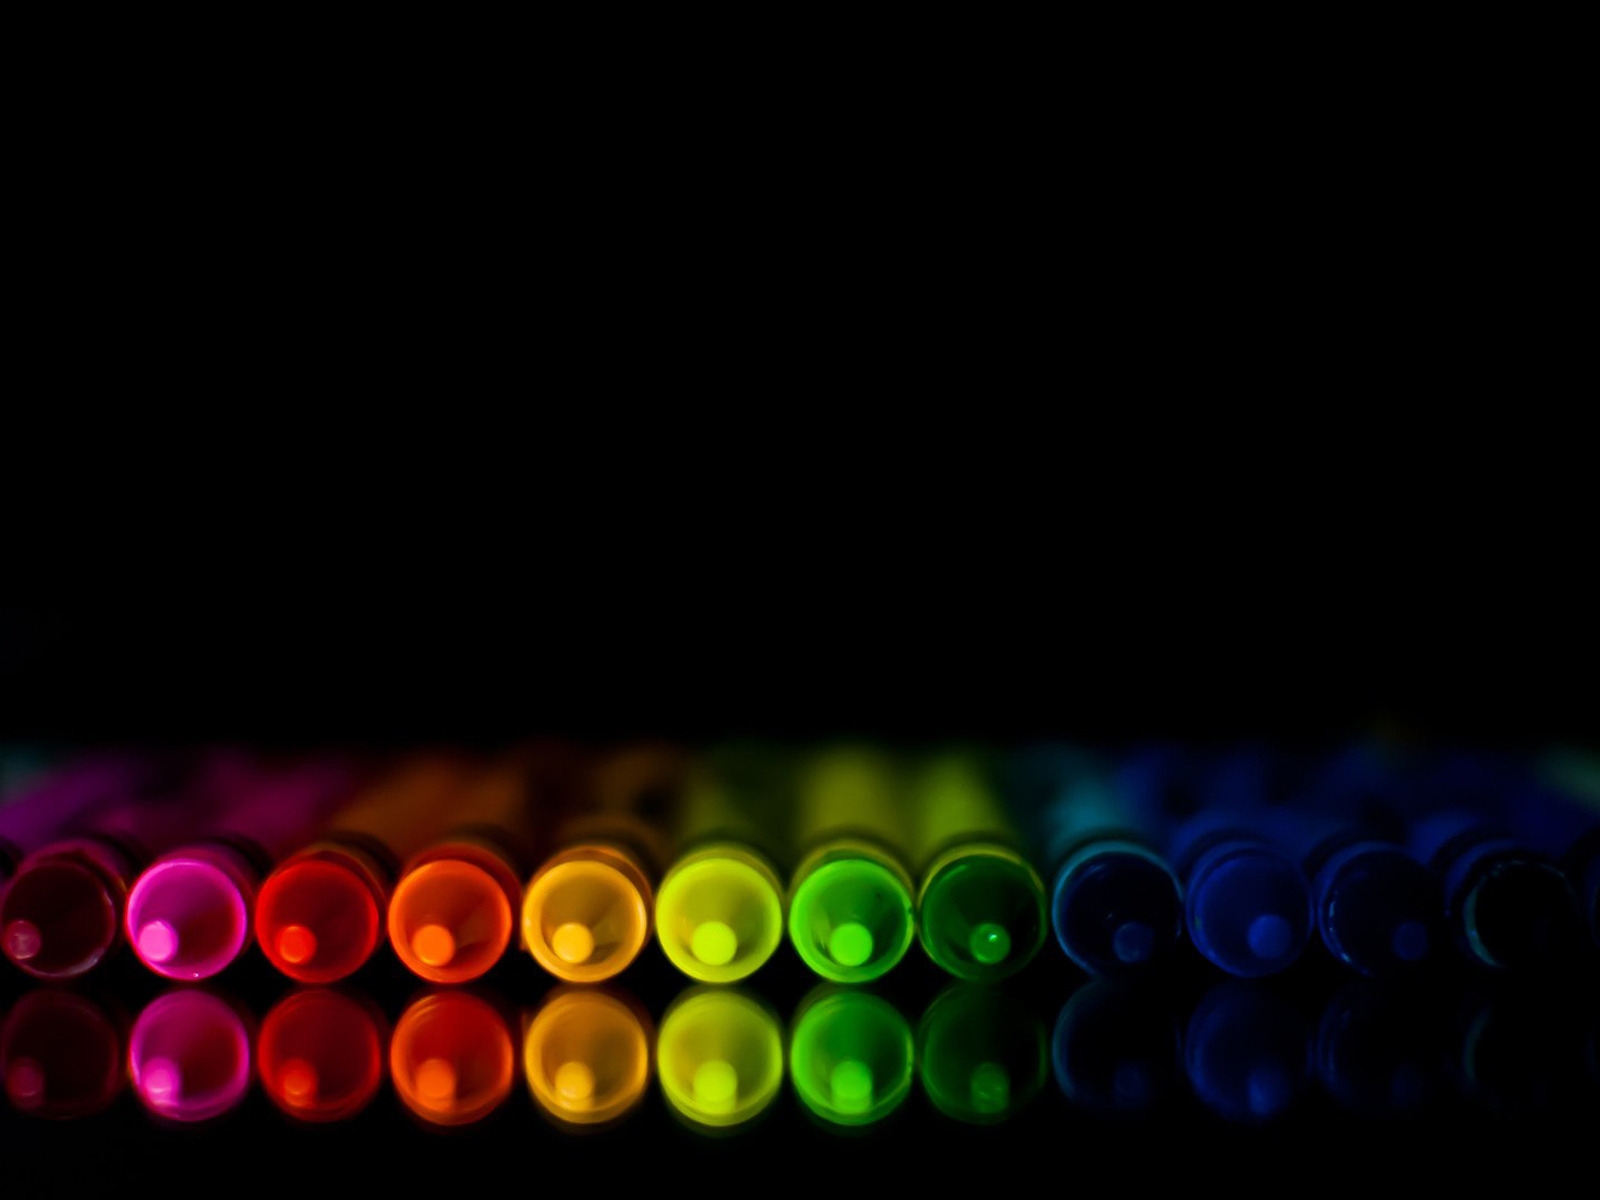 Crayons for 1600 x 1200 resolution